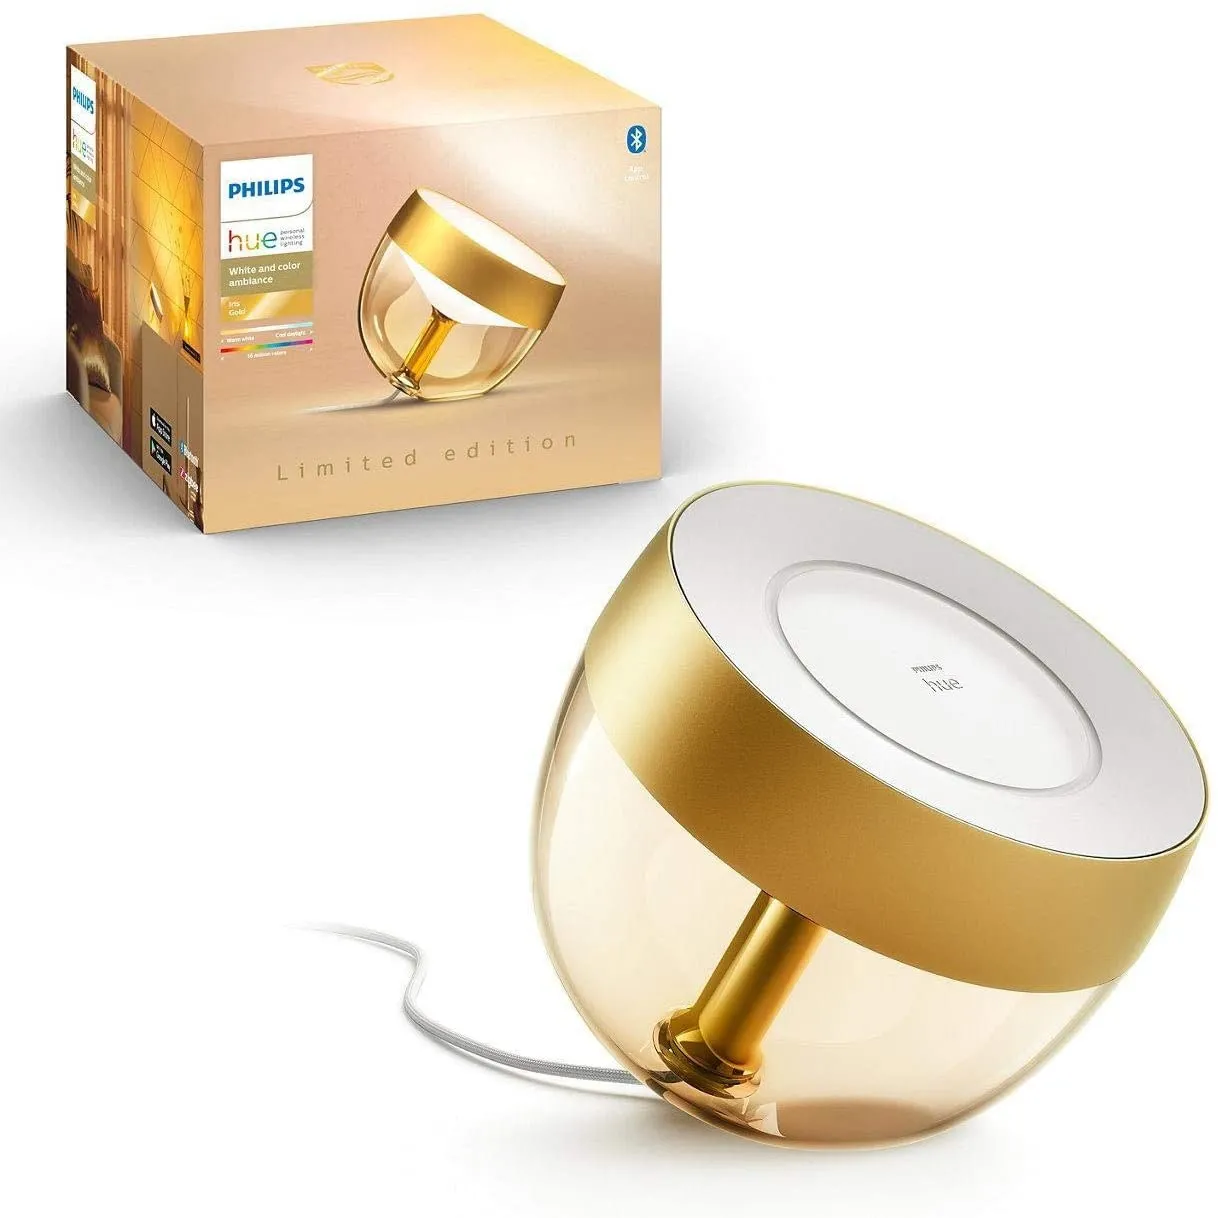 Hue Iris Gold Limited Edition Table Lamp (Generation 4)